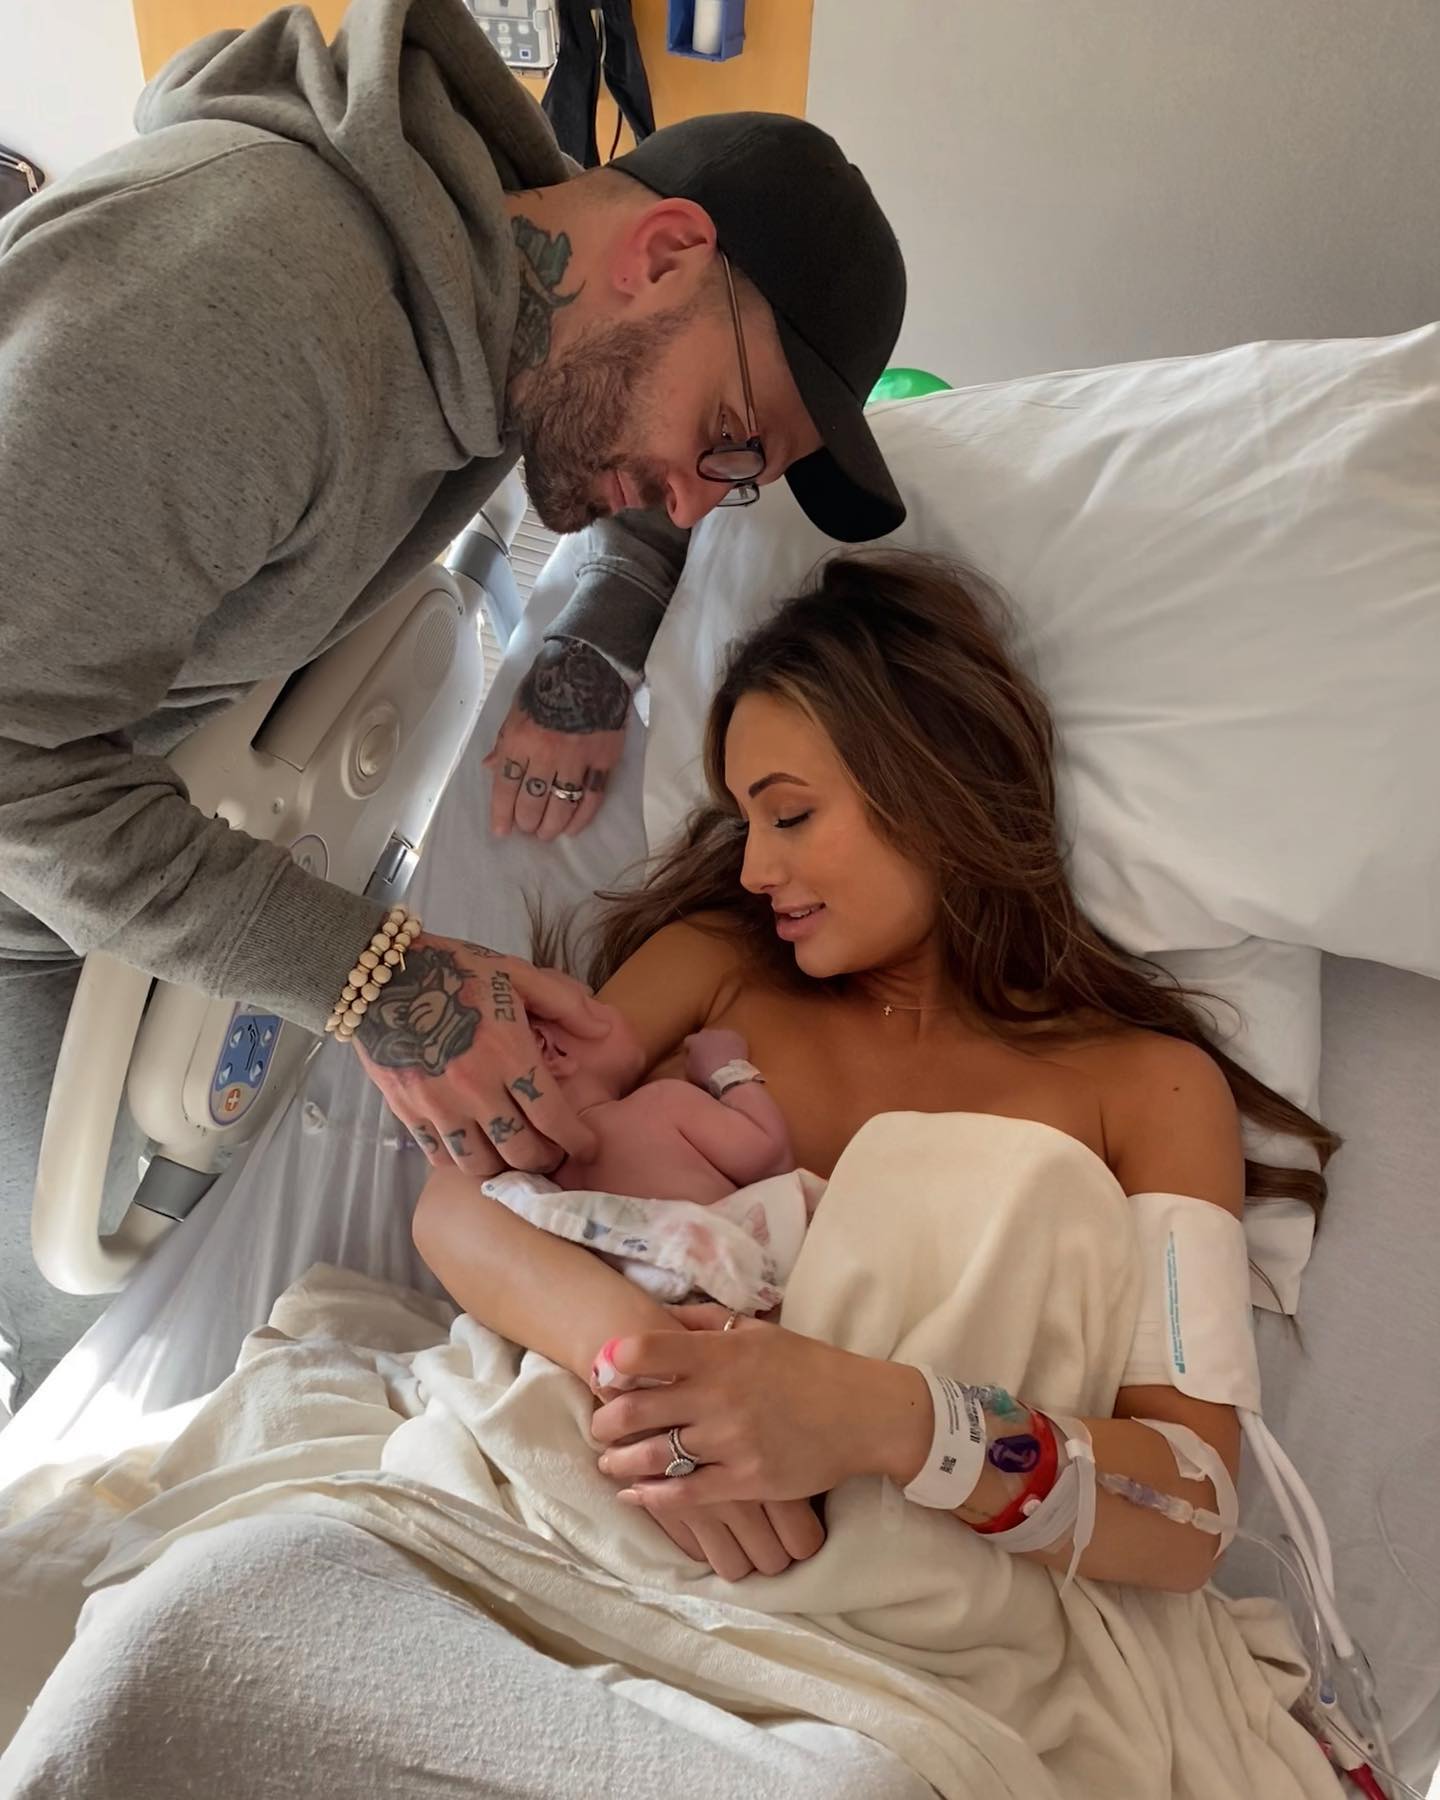 Carmella and Corey Graves welcome their first baby, Dimitri Paul Polinsky